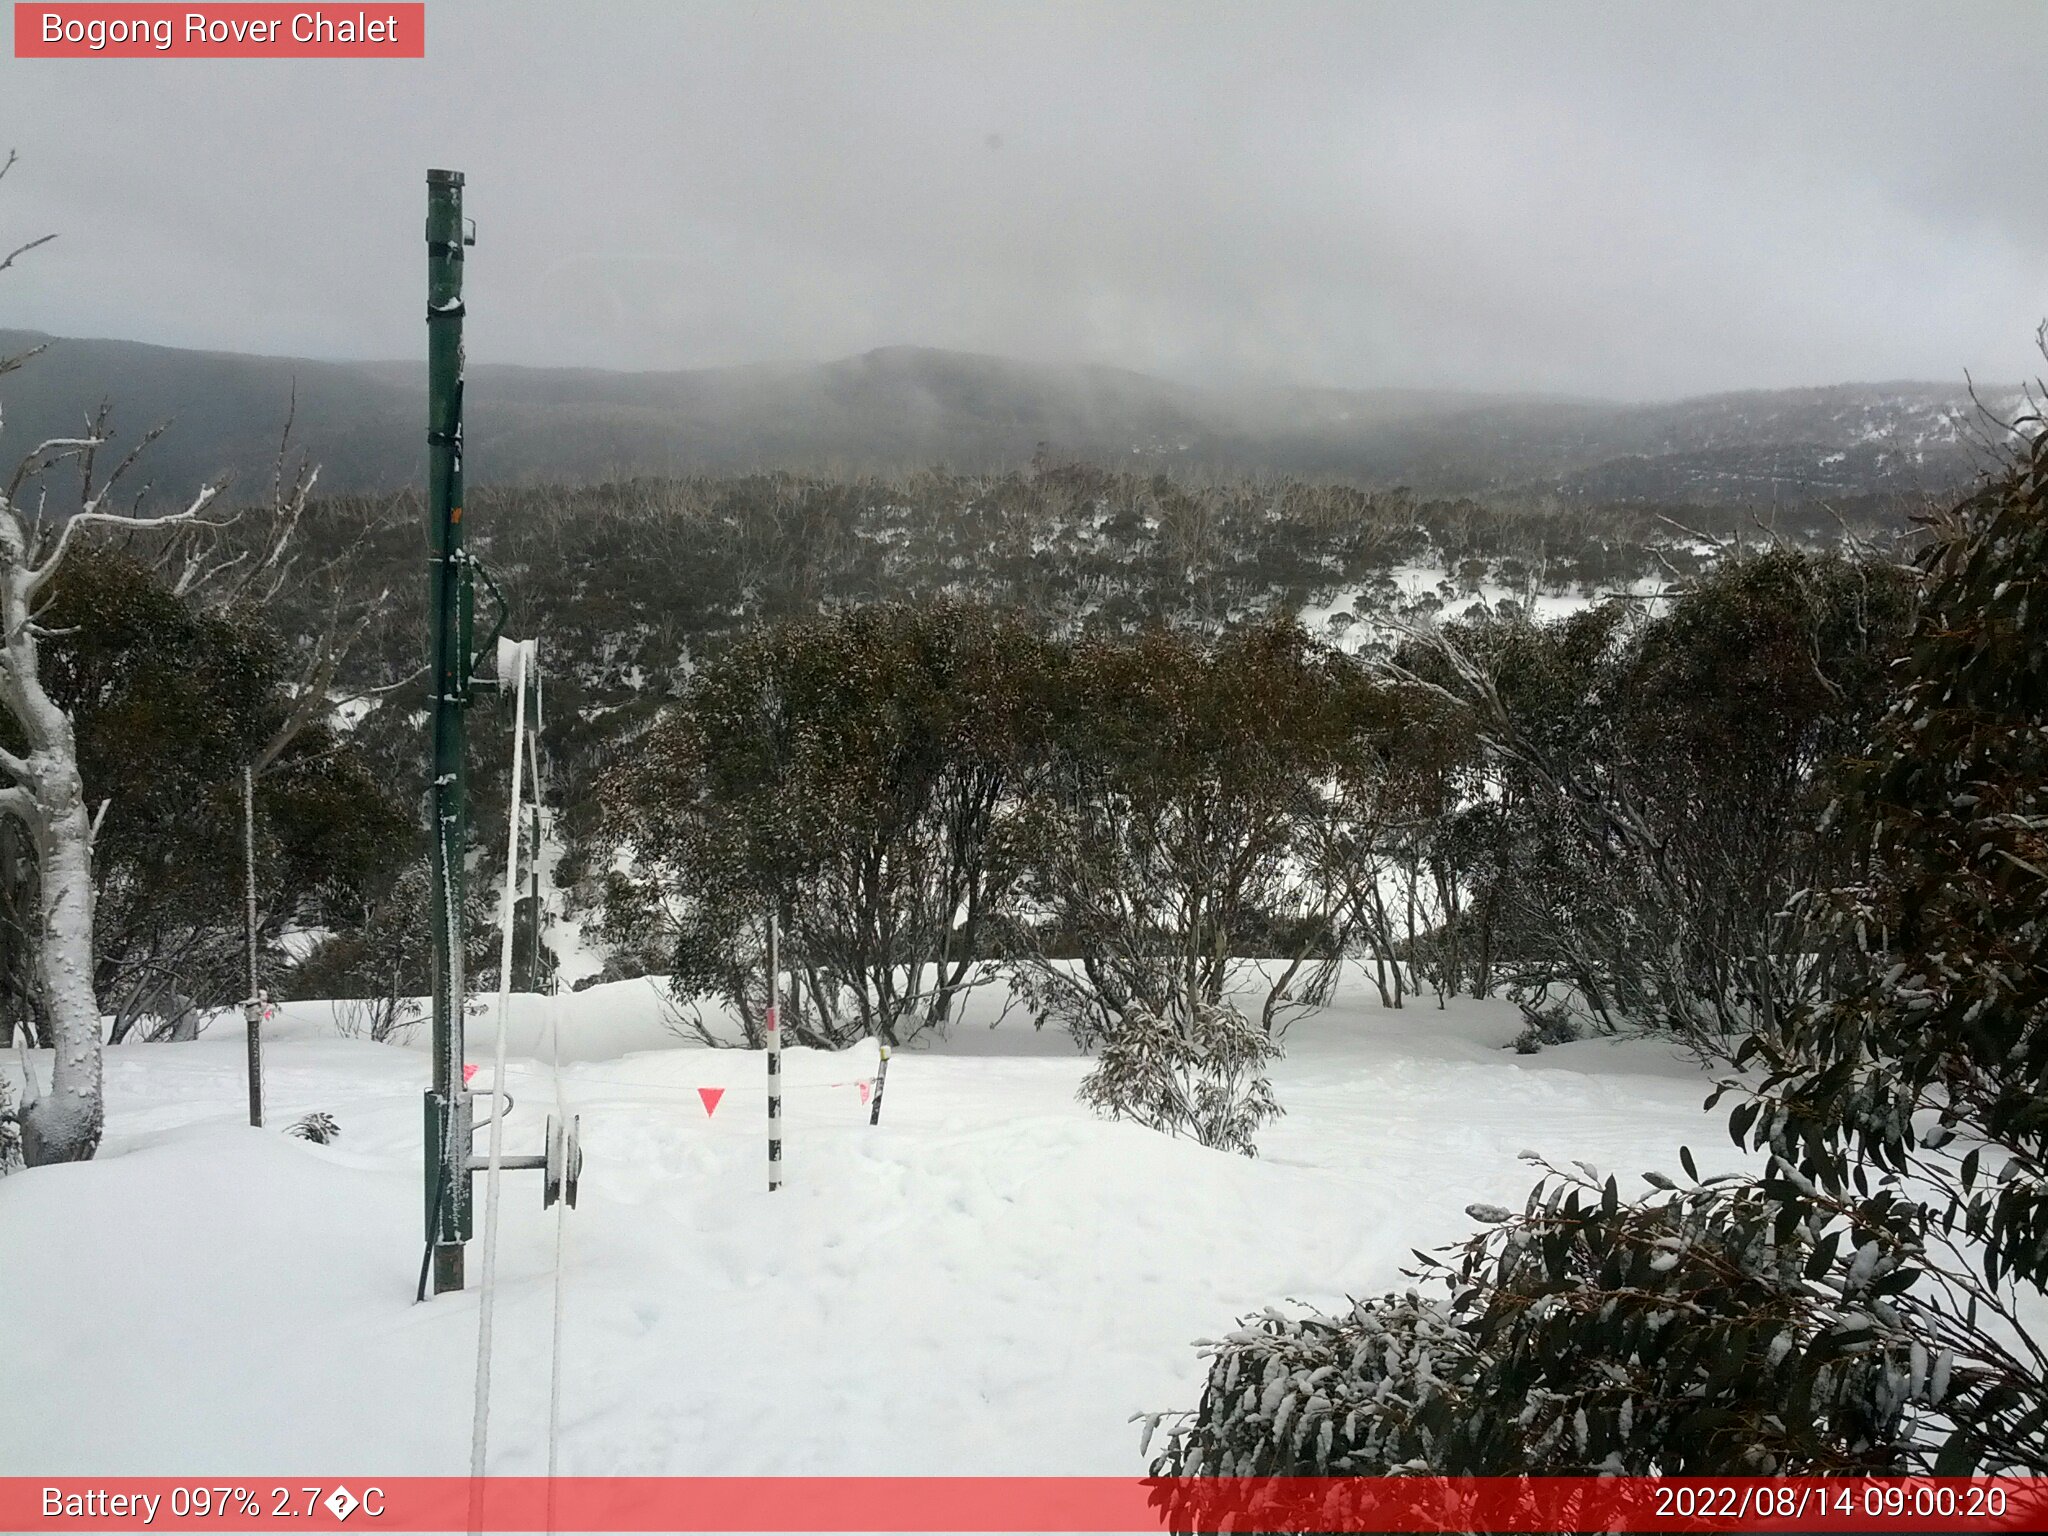 Bogong Web Cam 9:00am Sunday 14th of August 2022